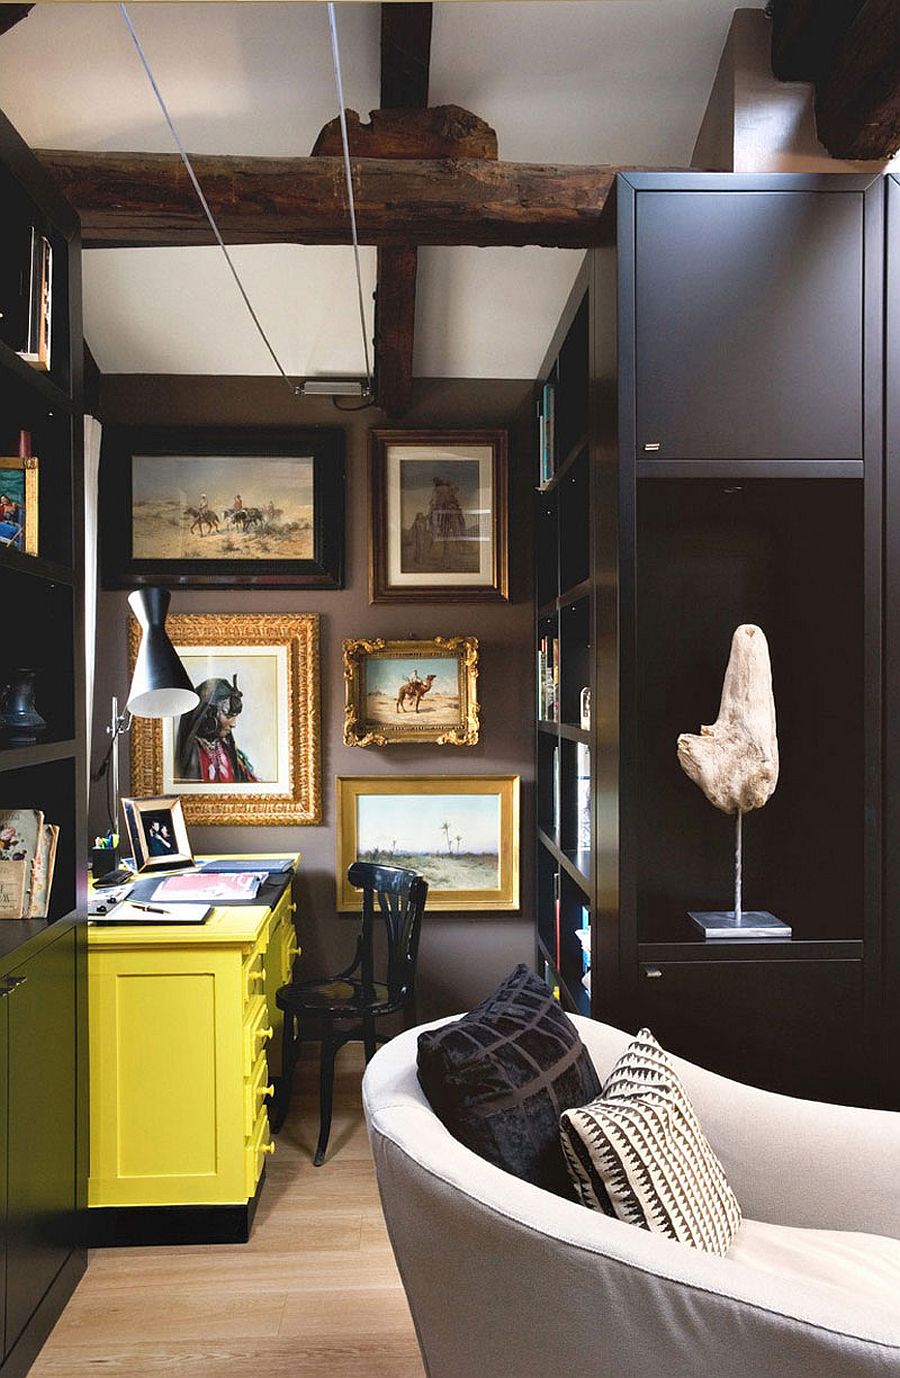 Wall art steals the show in the small, dark home office